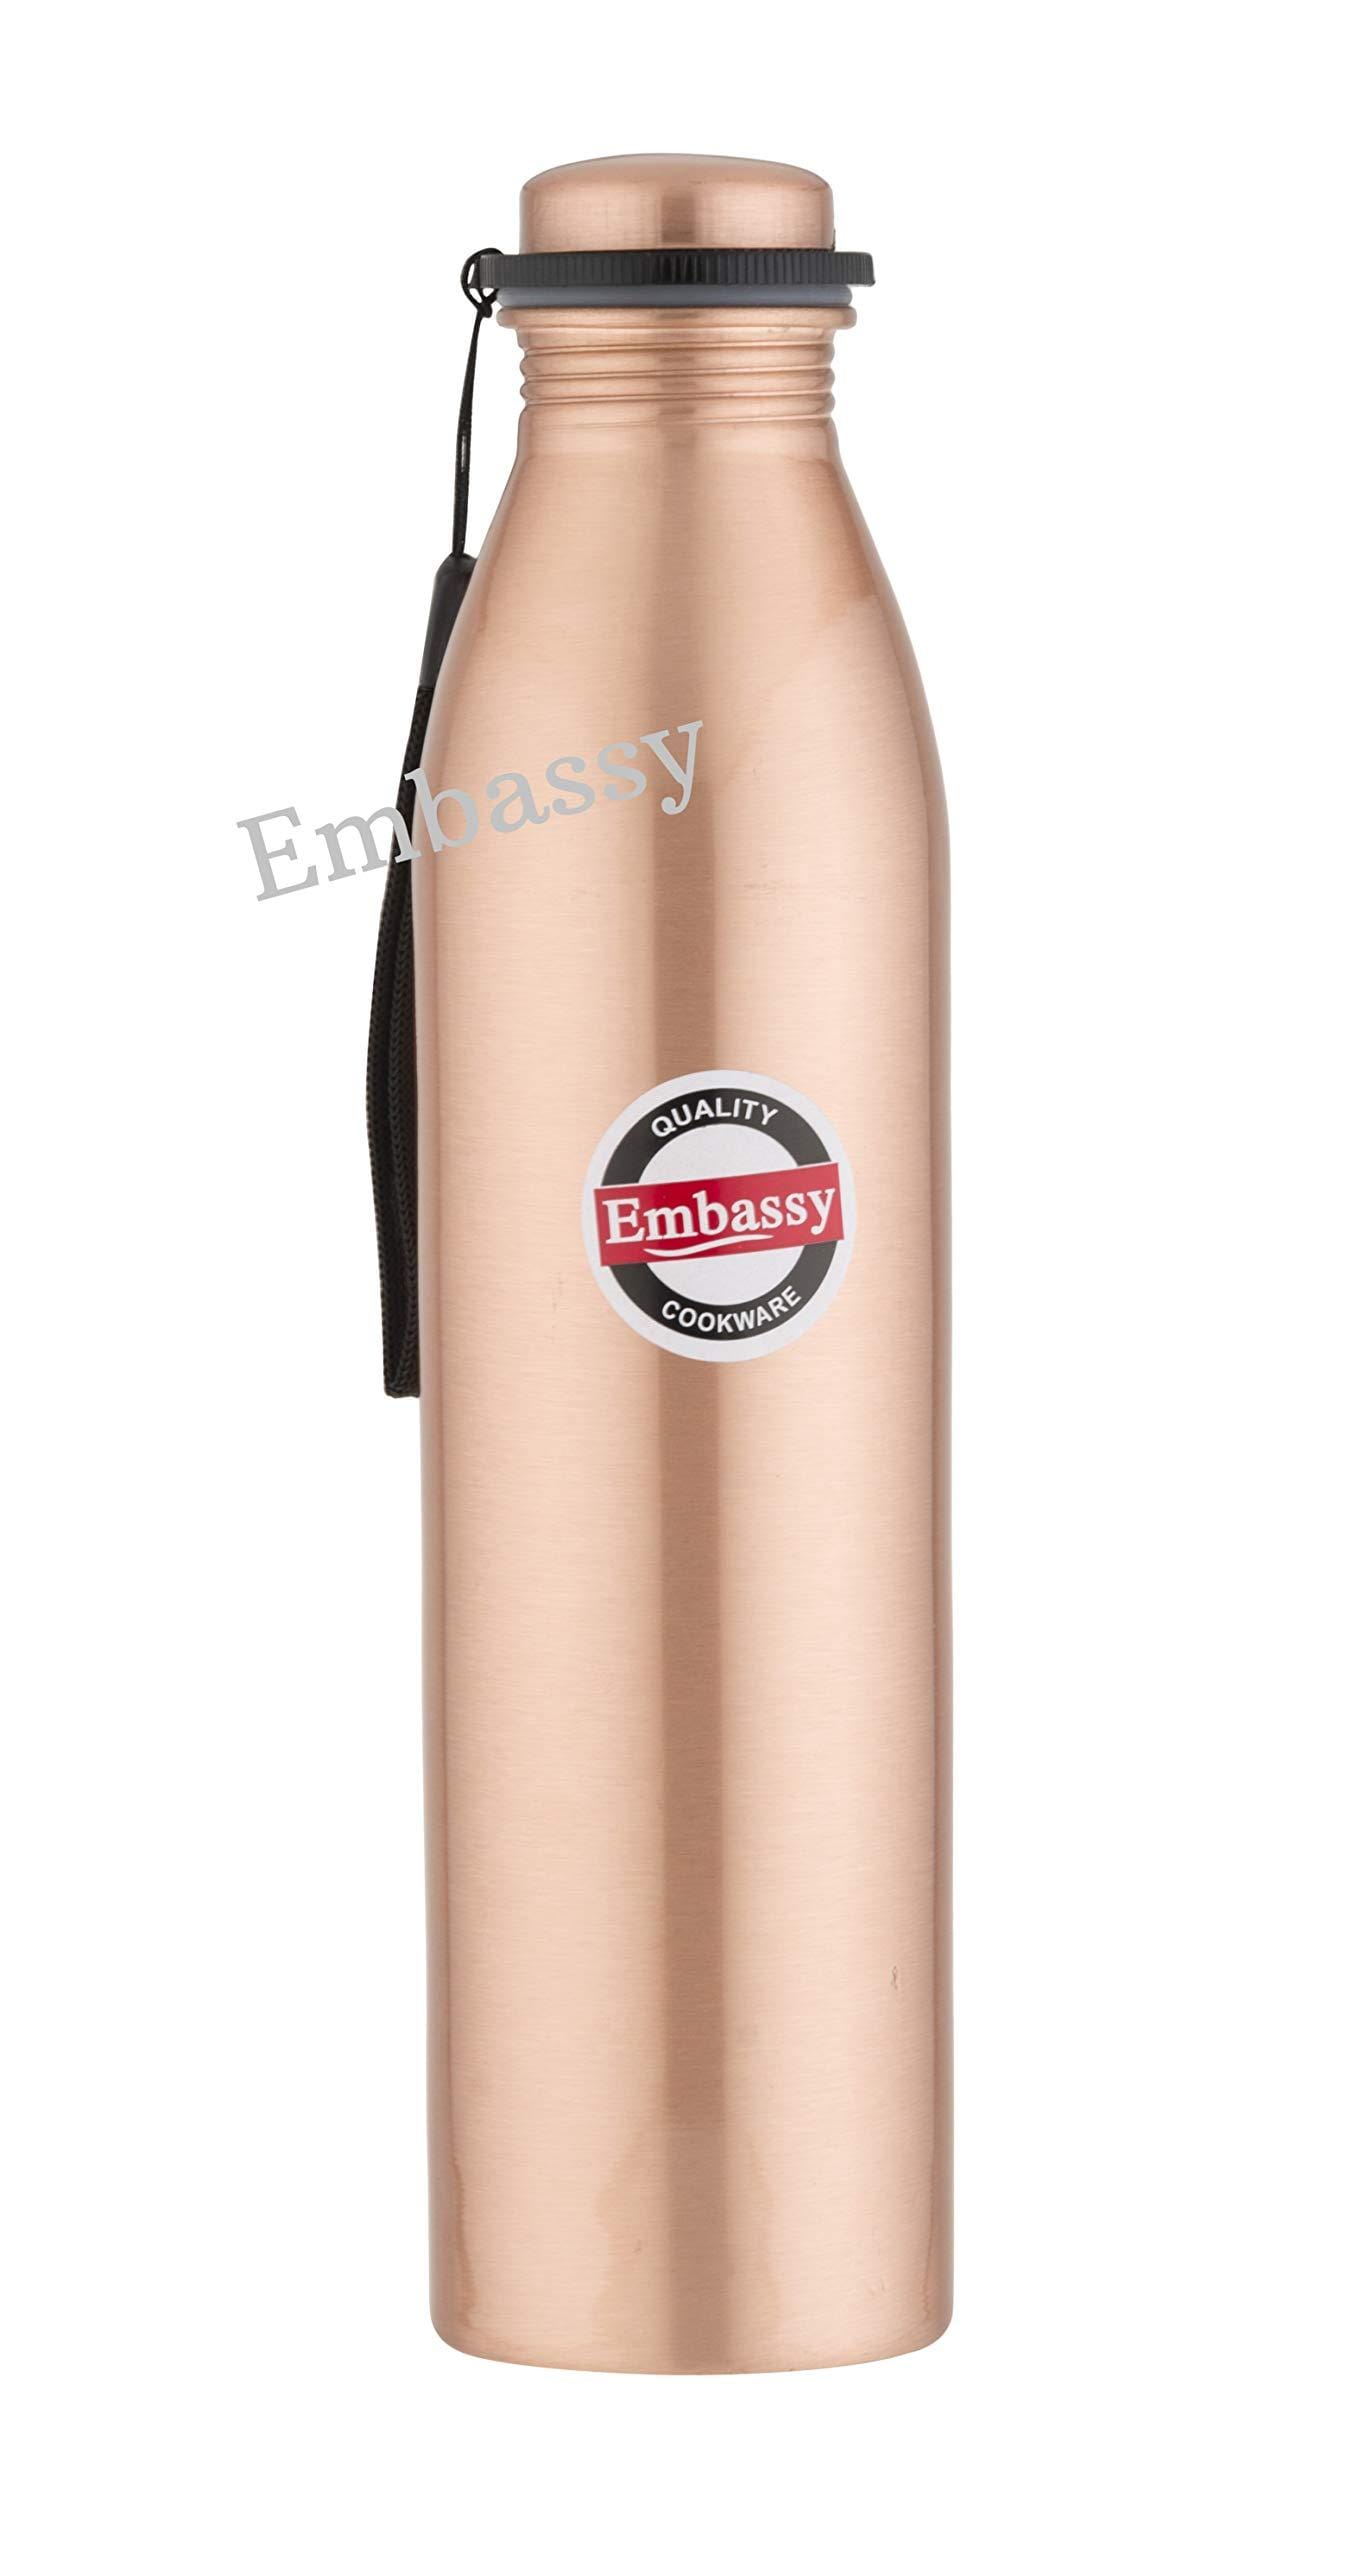 Embassy Premium Copper Water Bottle, Plain, 1000 ml, Pack of 1 - Leak-Proof, Jointless and Pure Copper - KITCHEN MART